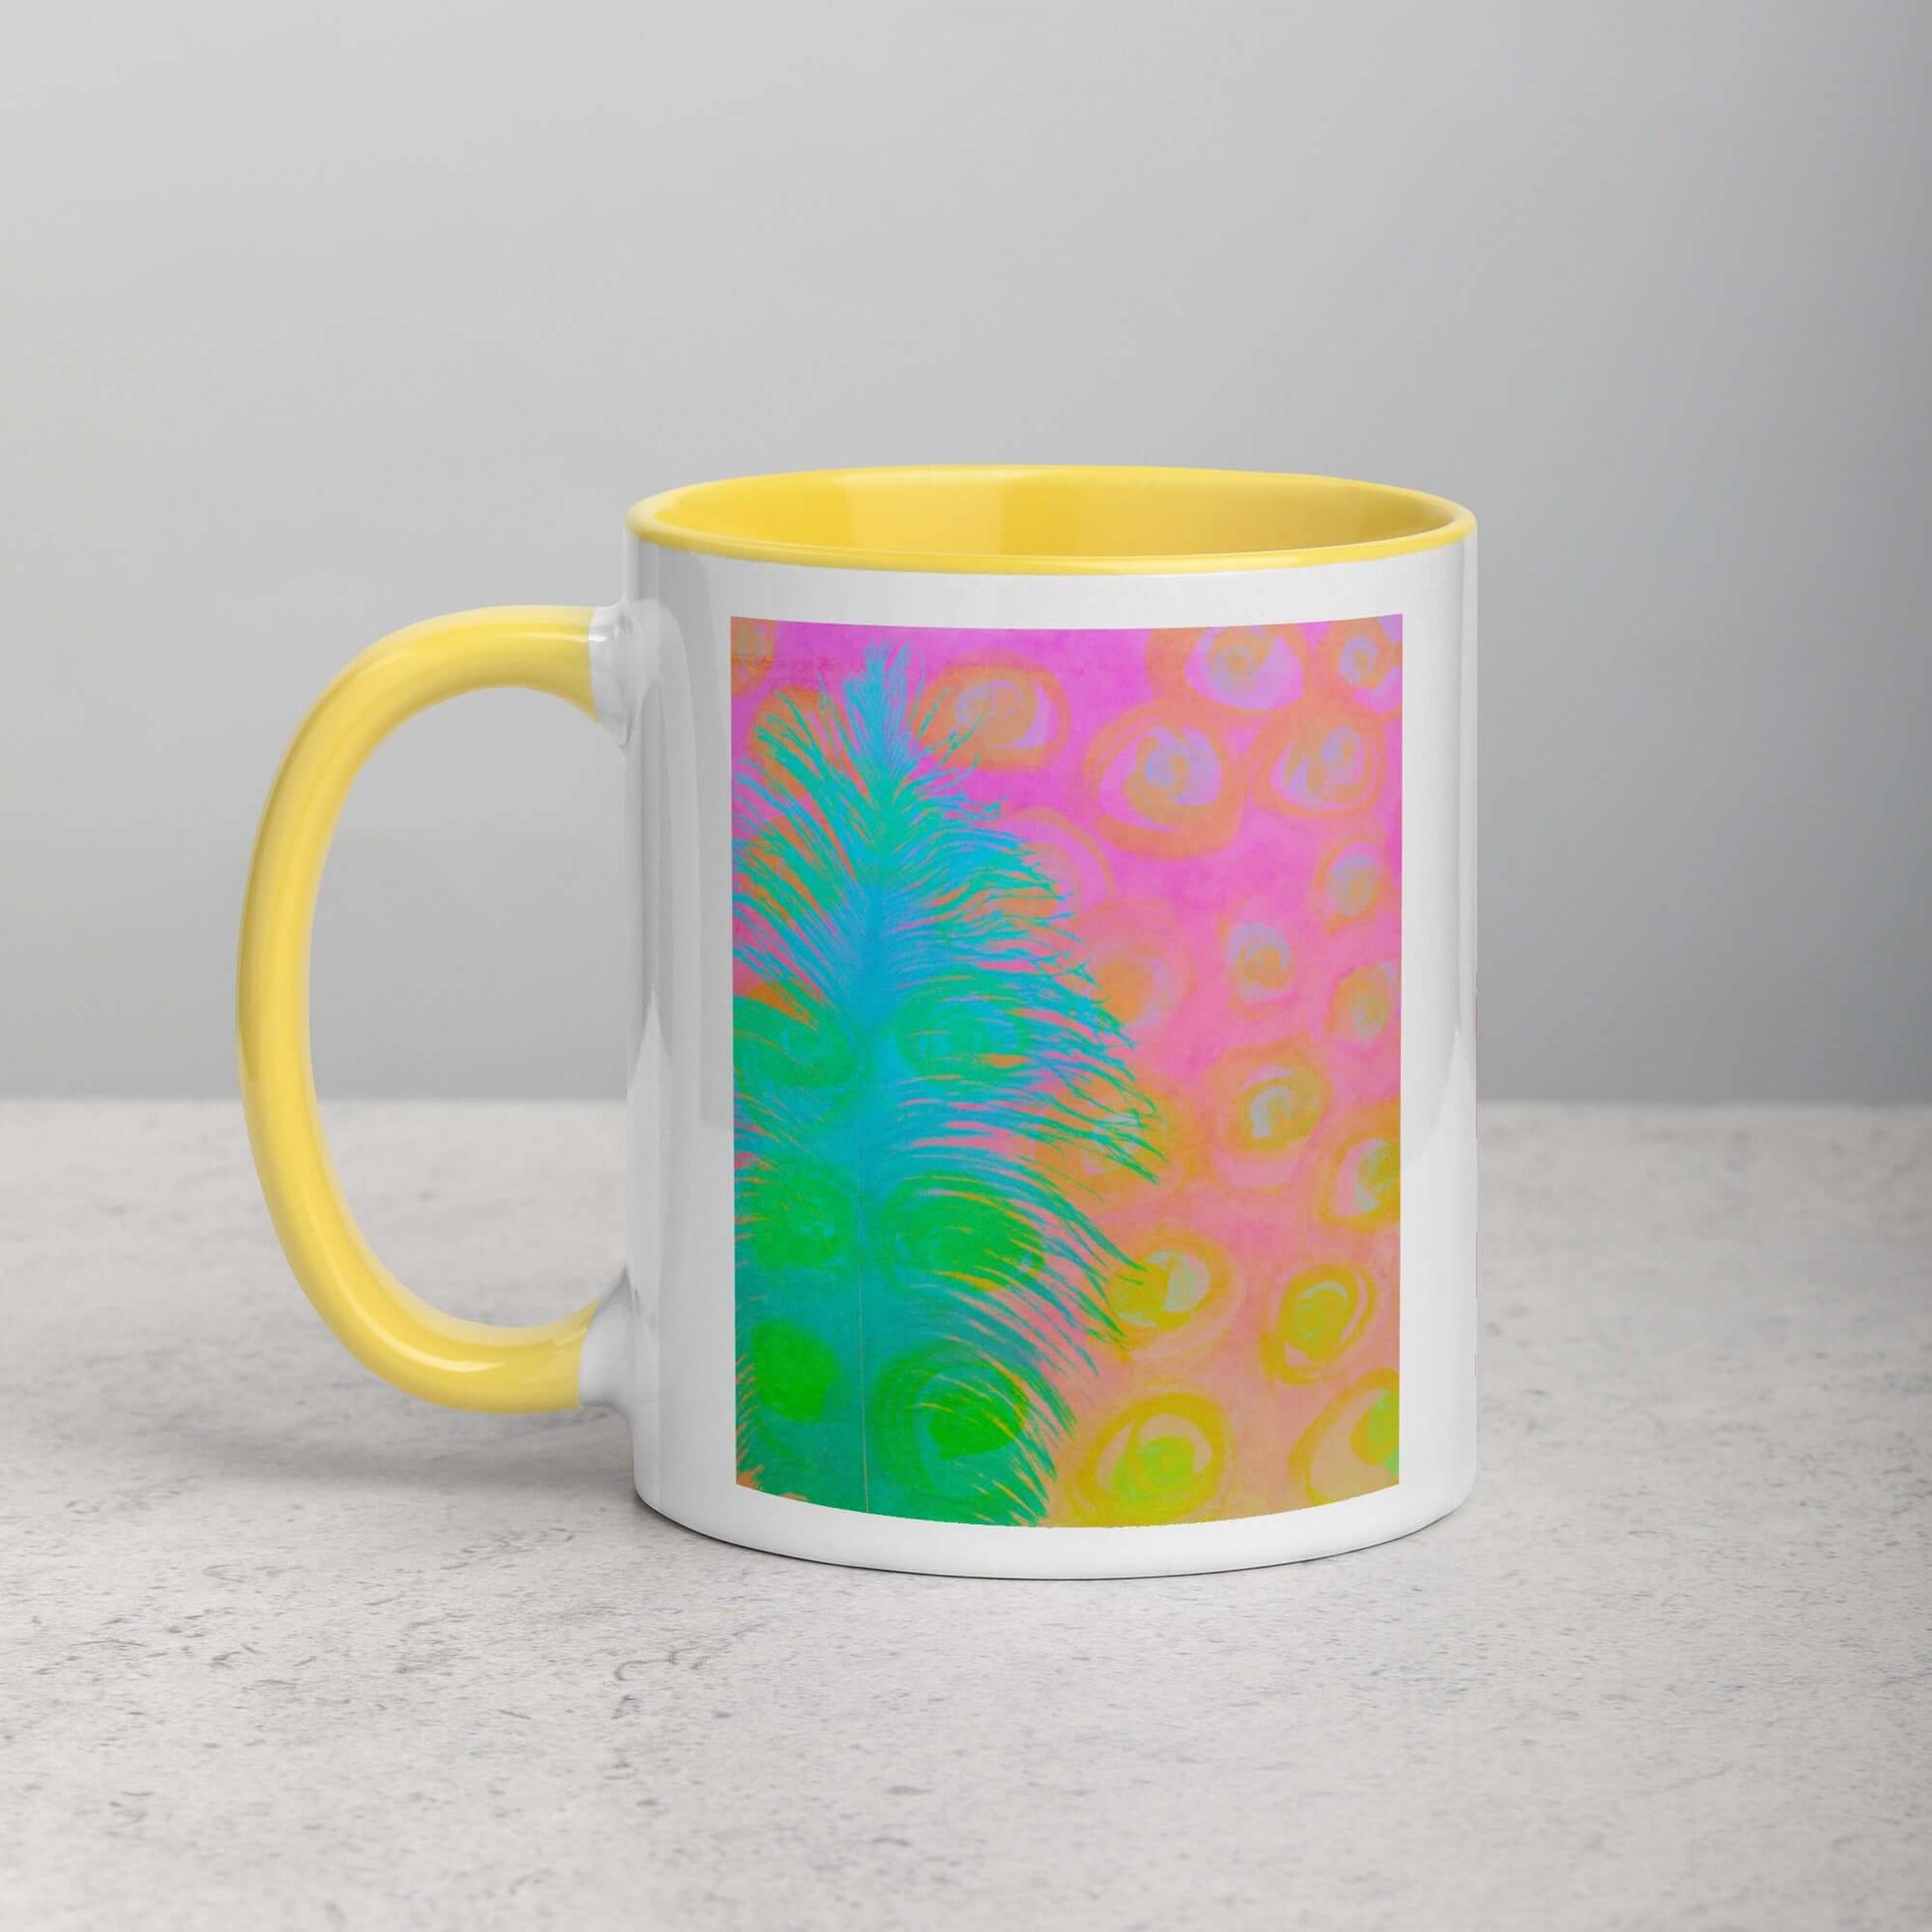 Bright Blue-Green Ostrich Feather on Pink and Yellow Background “My Other Half” Abstract Art Mug with Bright Yellow Color Inside Left Handed Front View